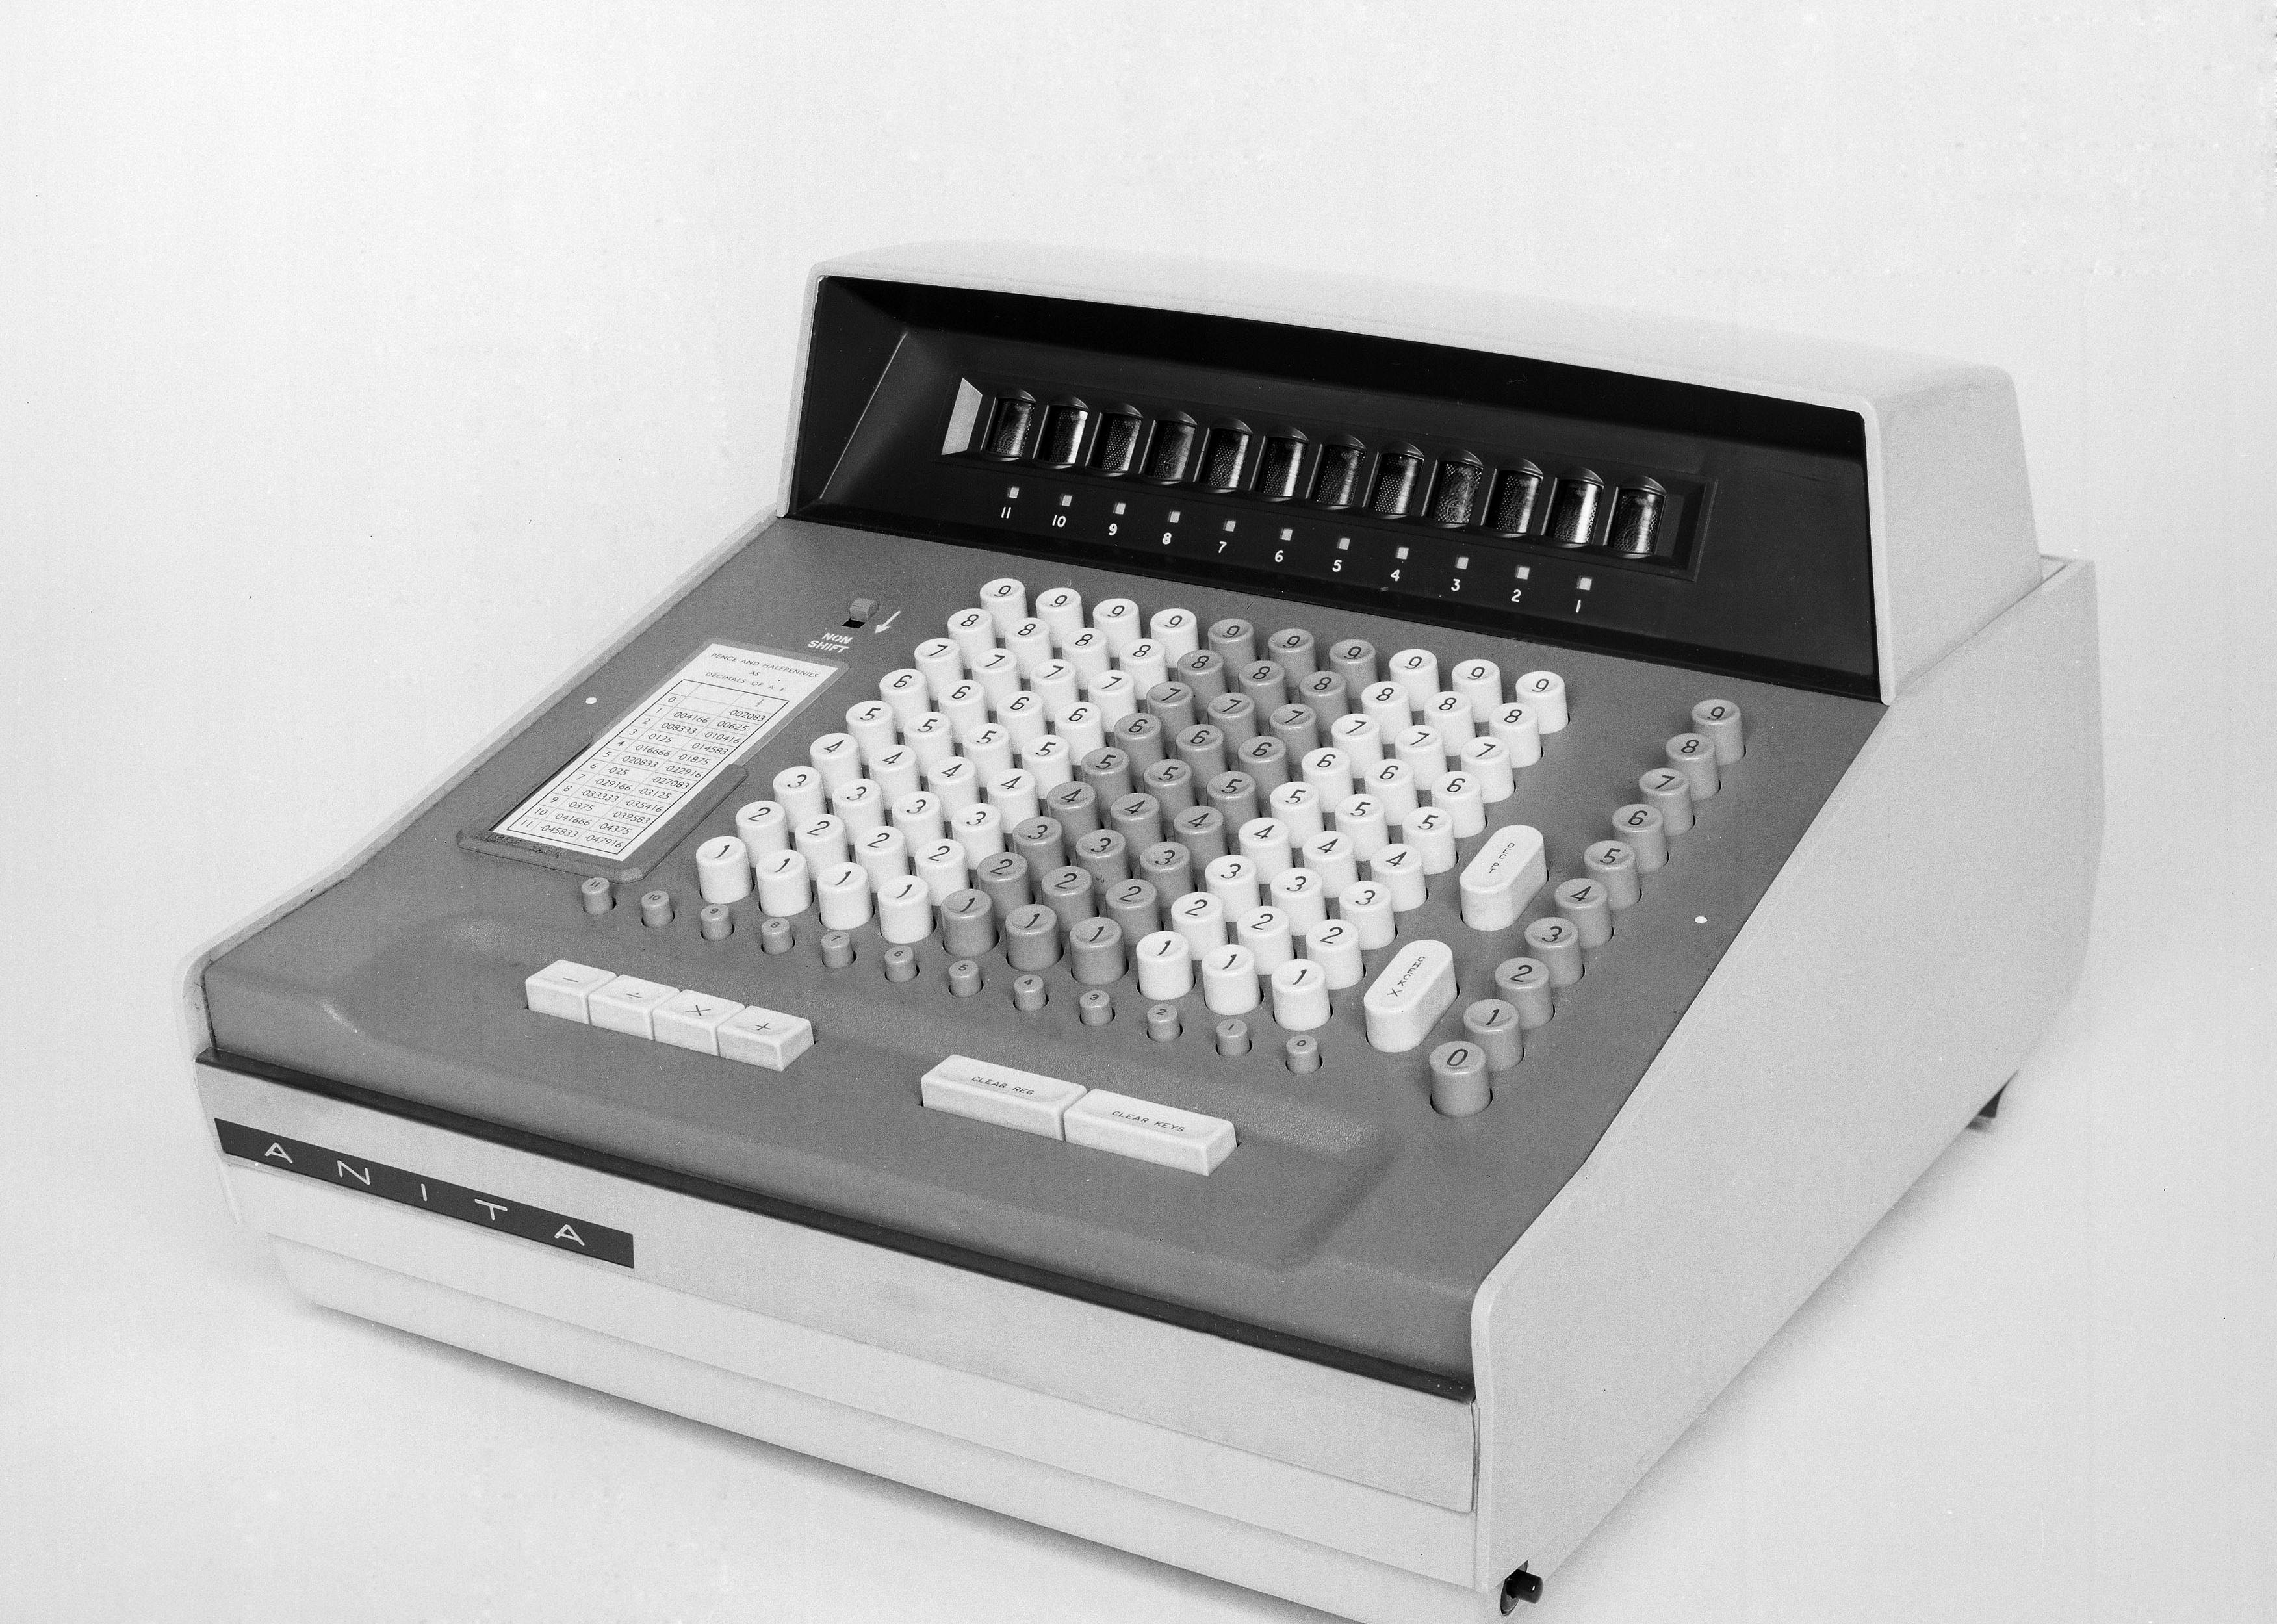 The Anita electronic desk calculating machine with a full 10 column keyboard with separate multiplication column and 12 figure result display.